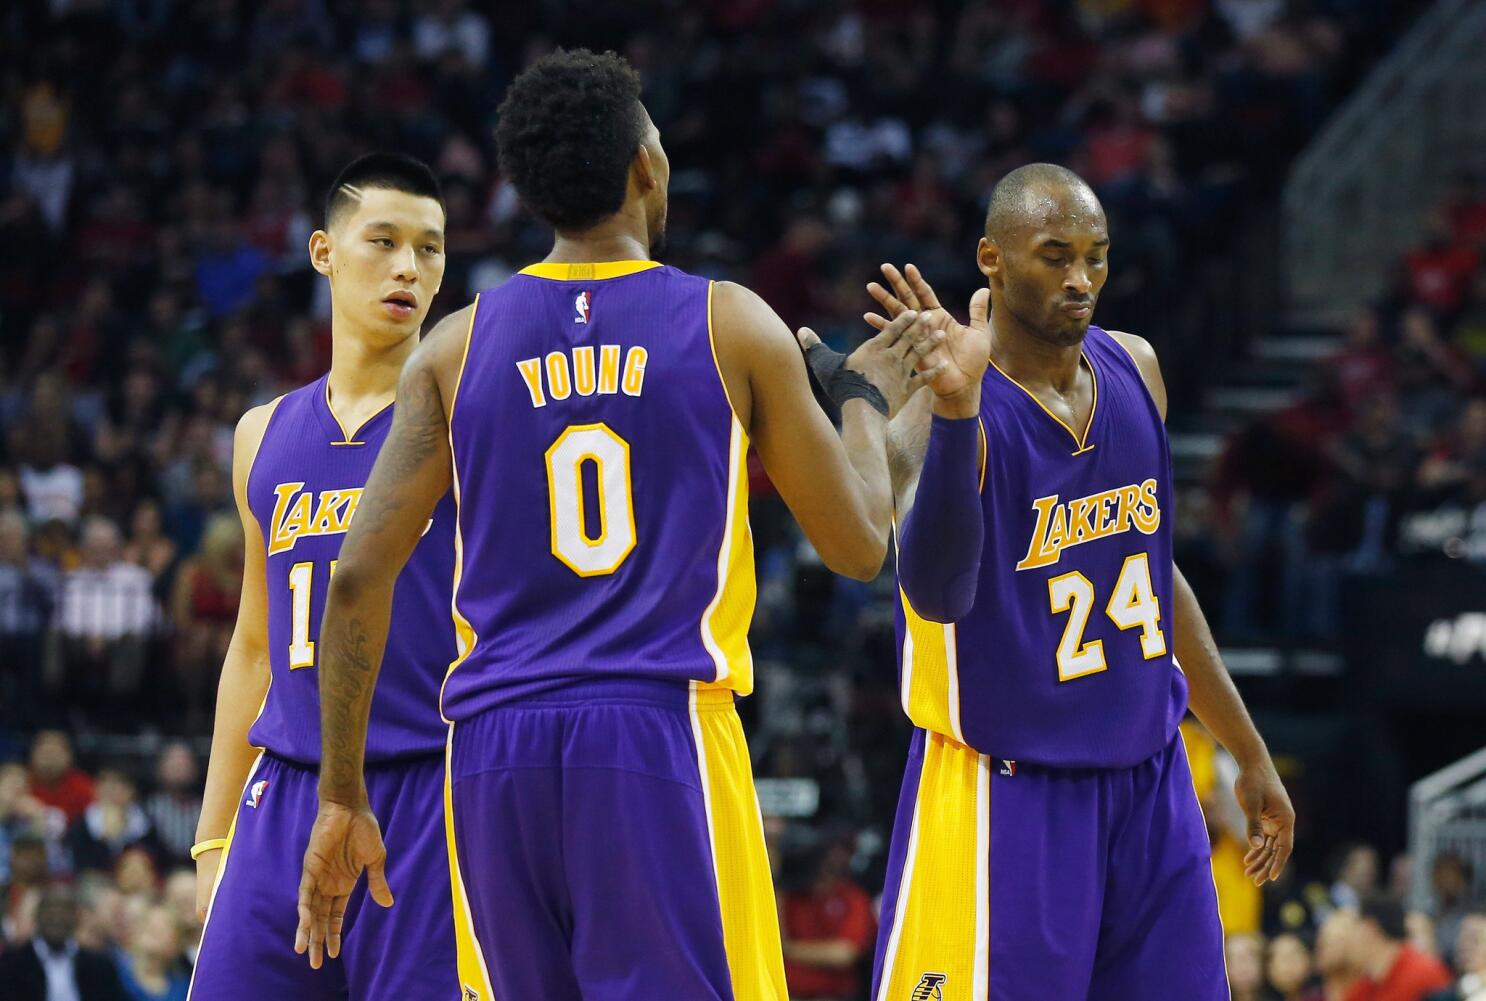 L.A. Lakers' Kobe Bryant shouts expletives at Jeremy Lin and